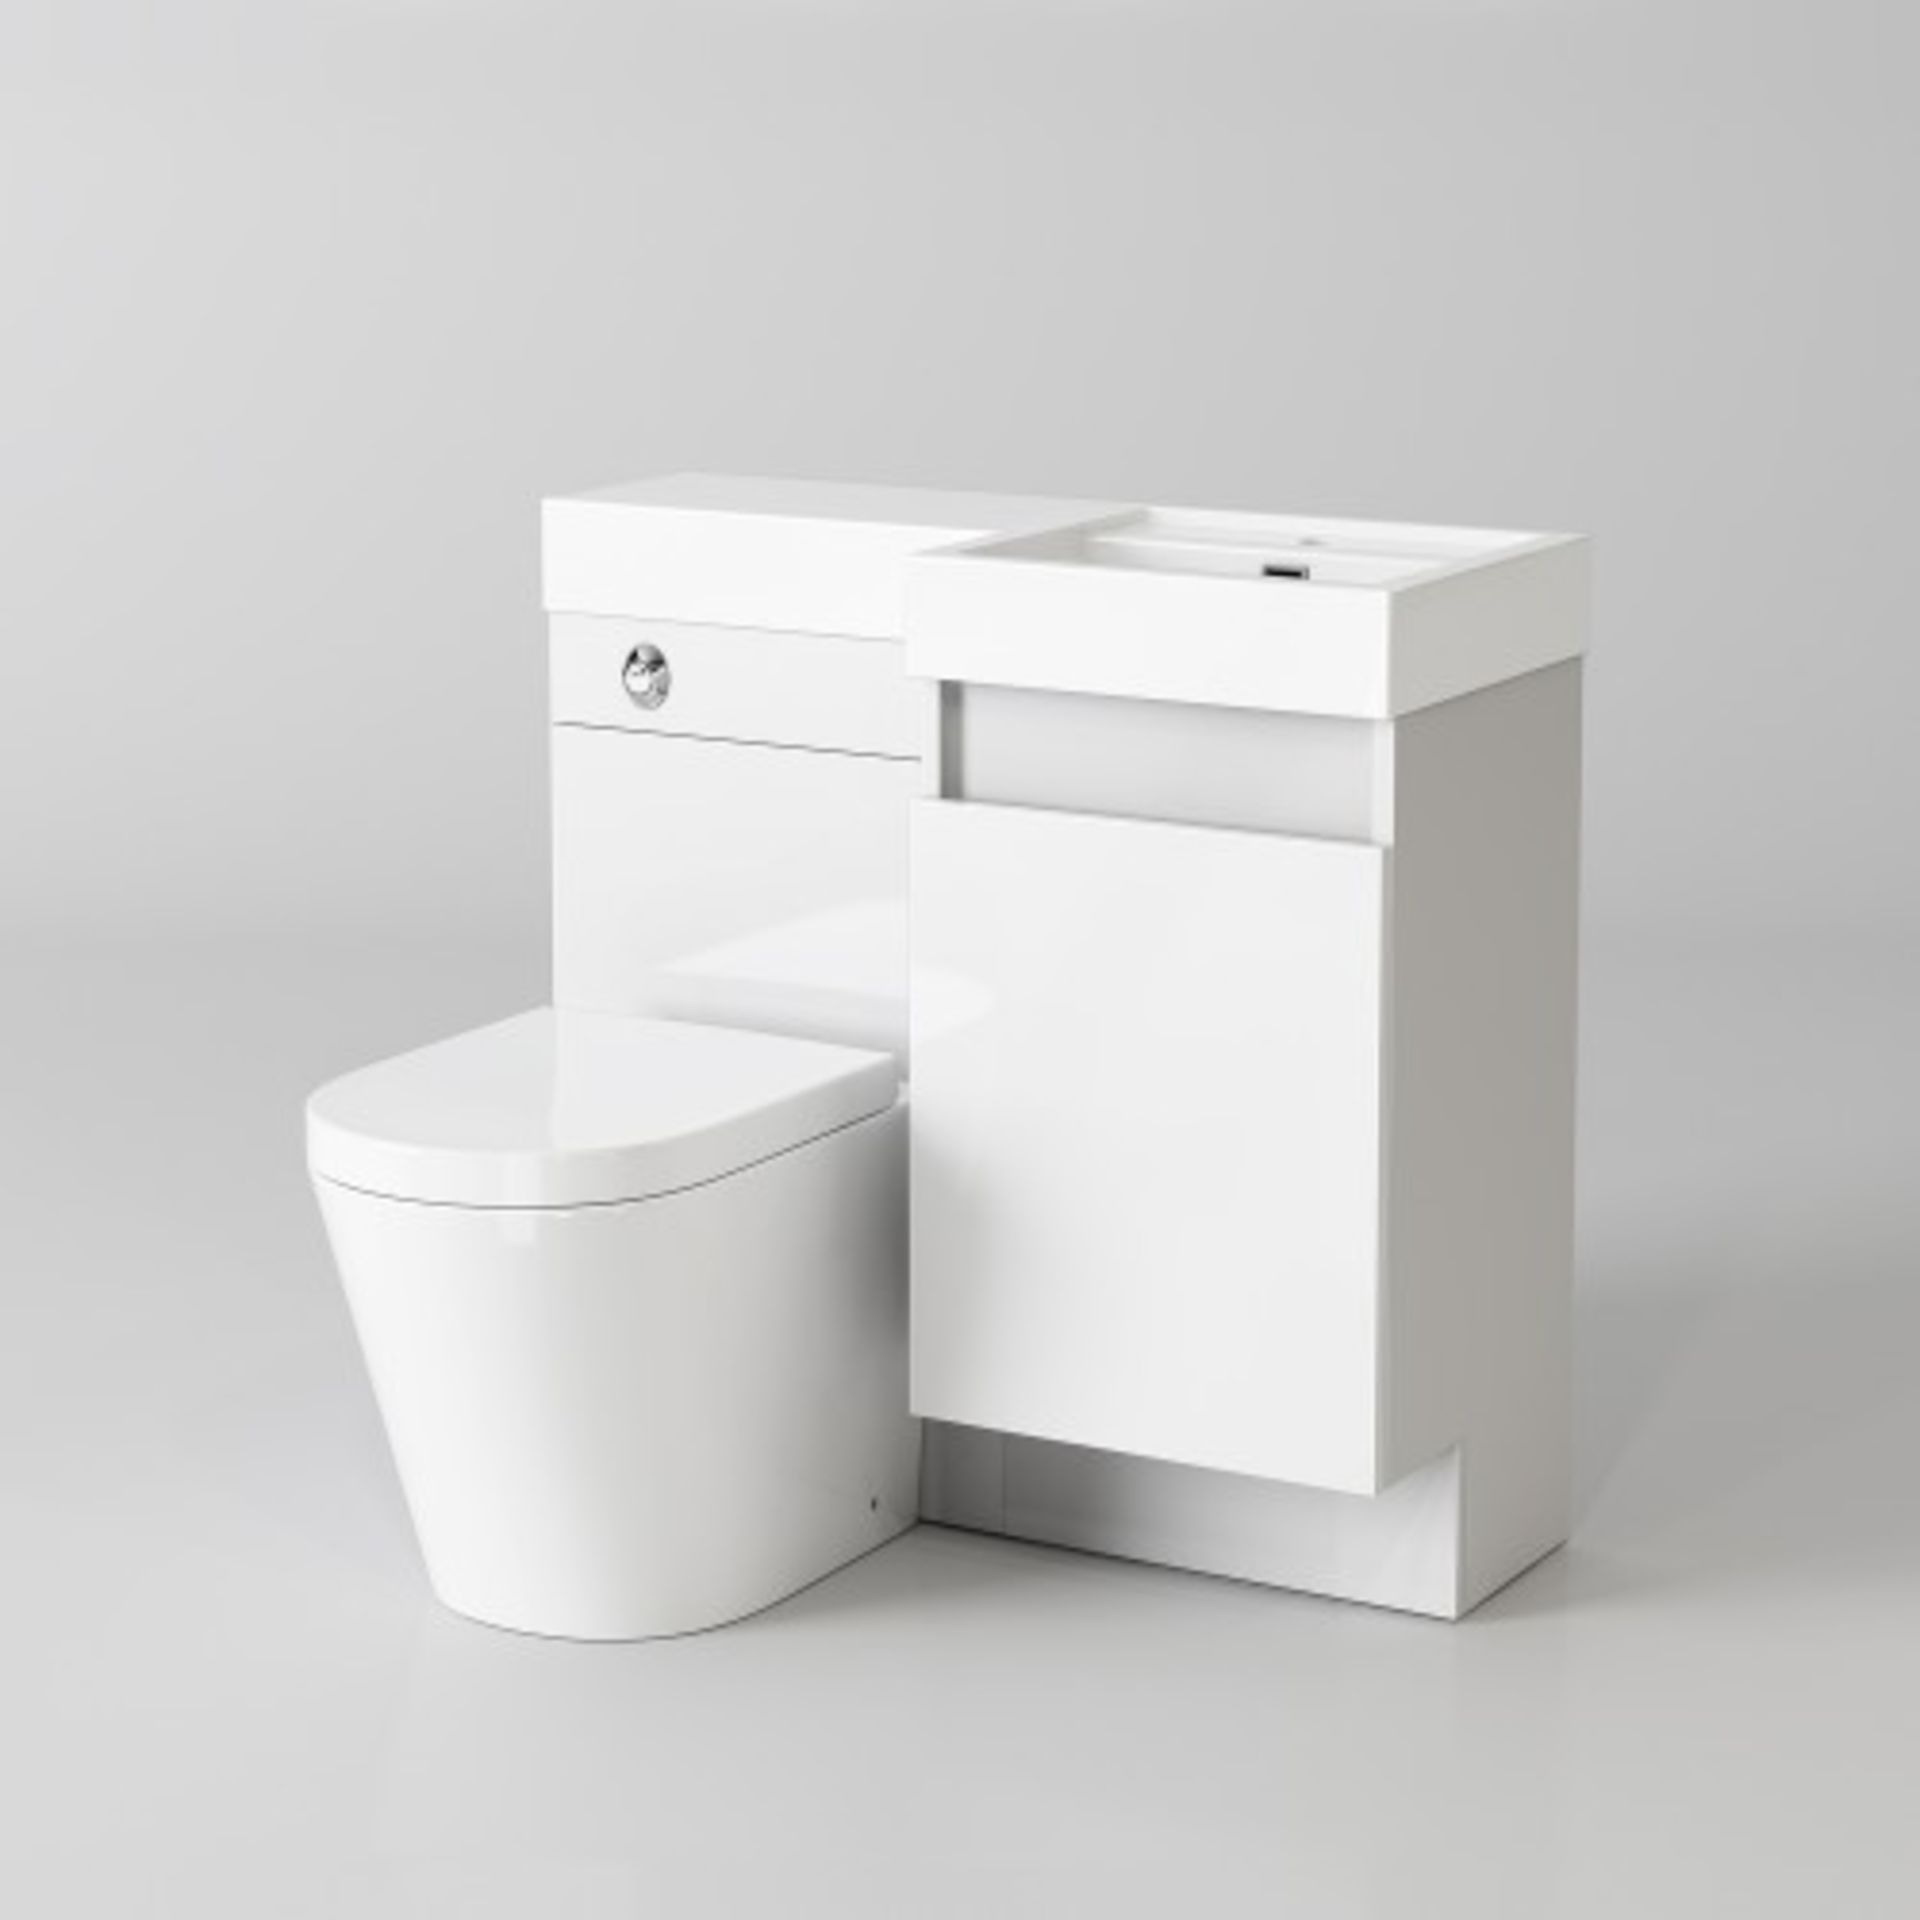 New & Boxed 906mm Olympia Gloss White Drawer Vanity Unit - Lyon Pan, Right Hand. Basin, Unit A... - Image 2 of 4